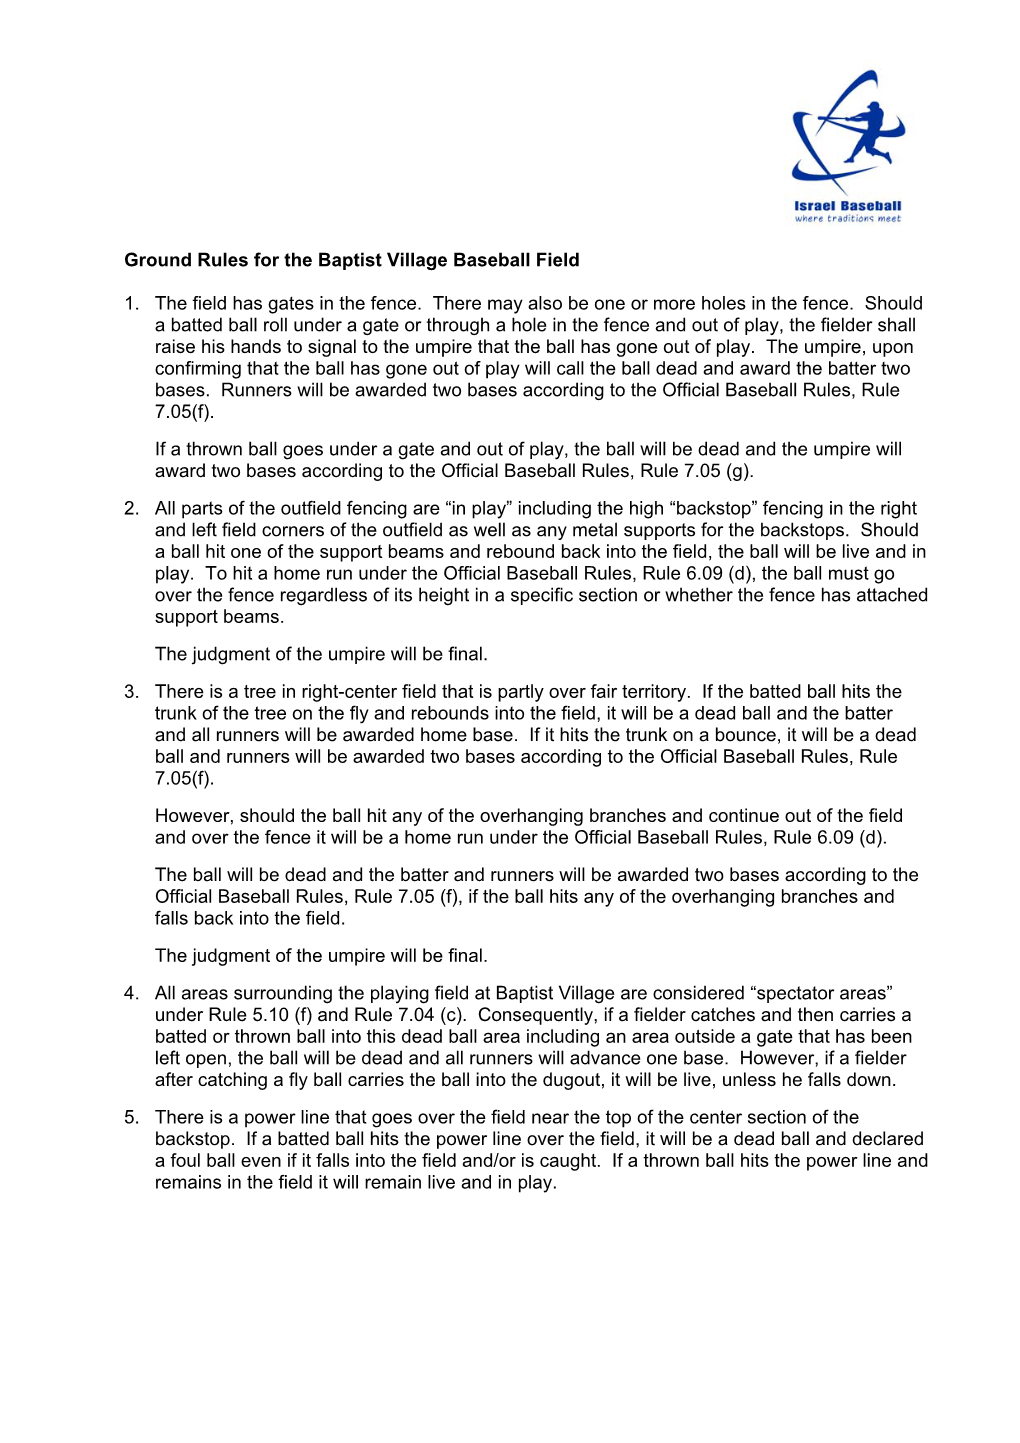 Ground Rules for the Baptist Village Baseball Field